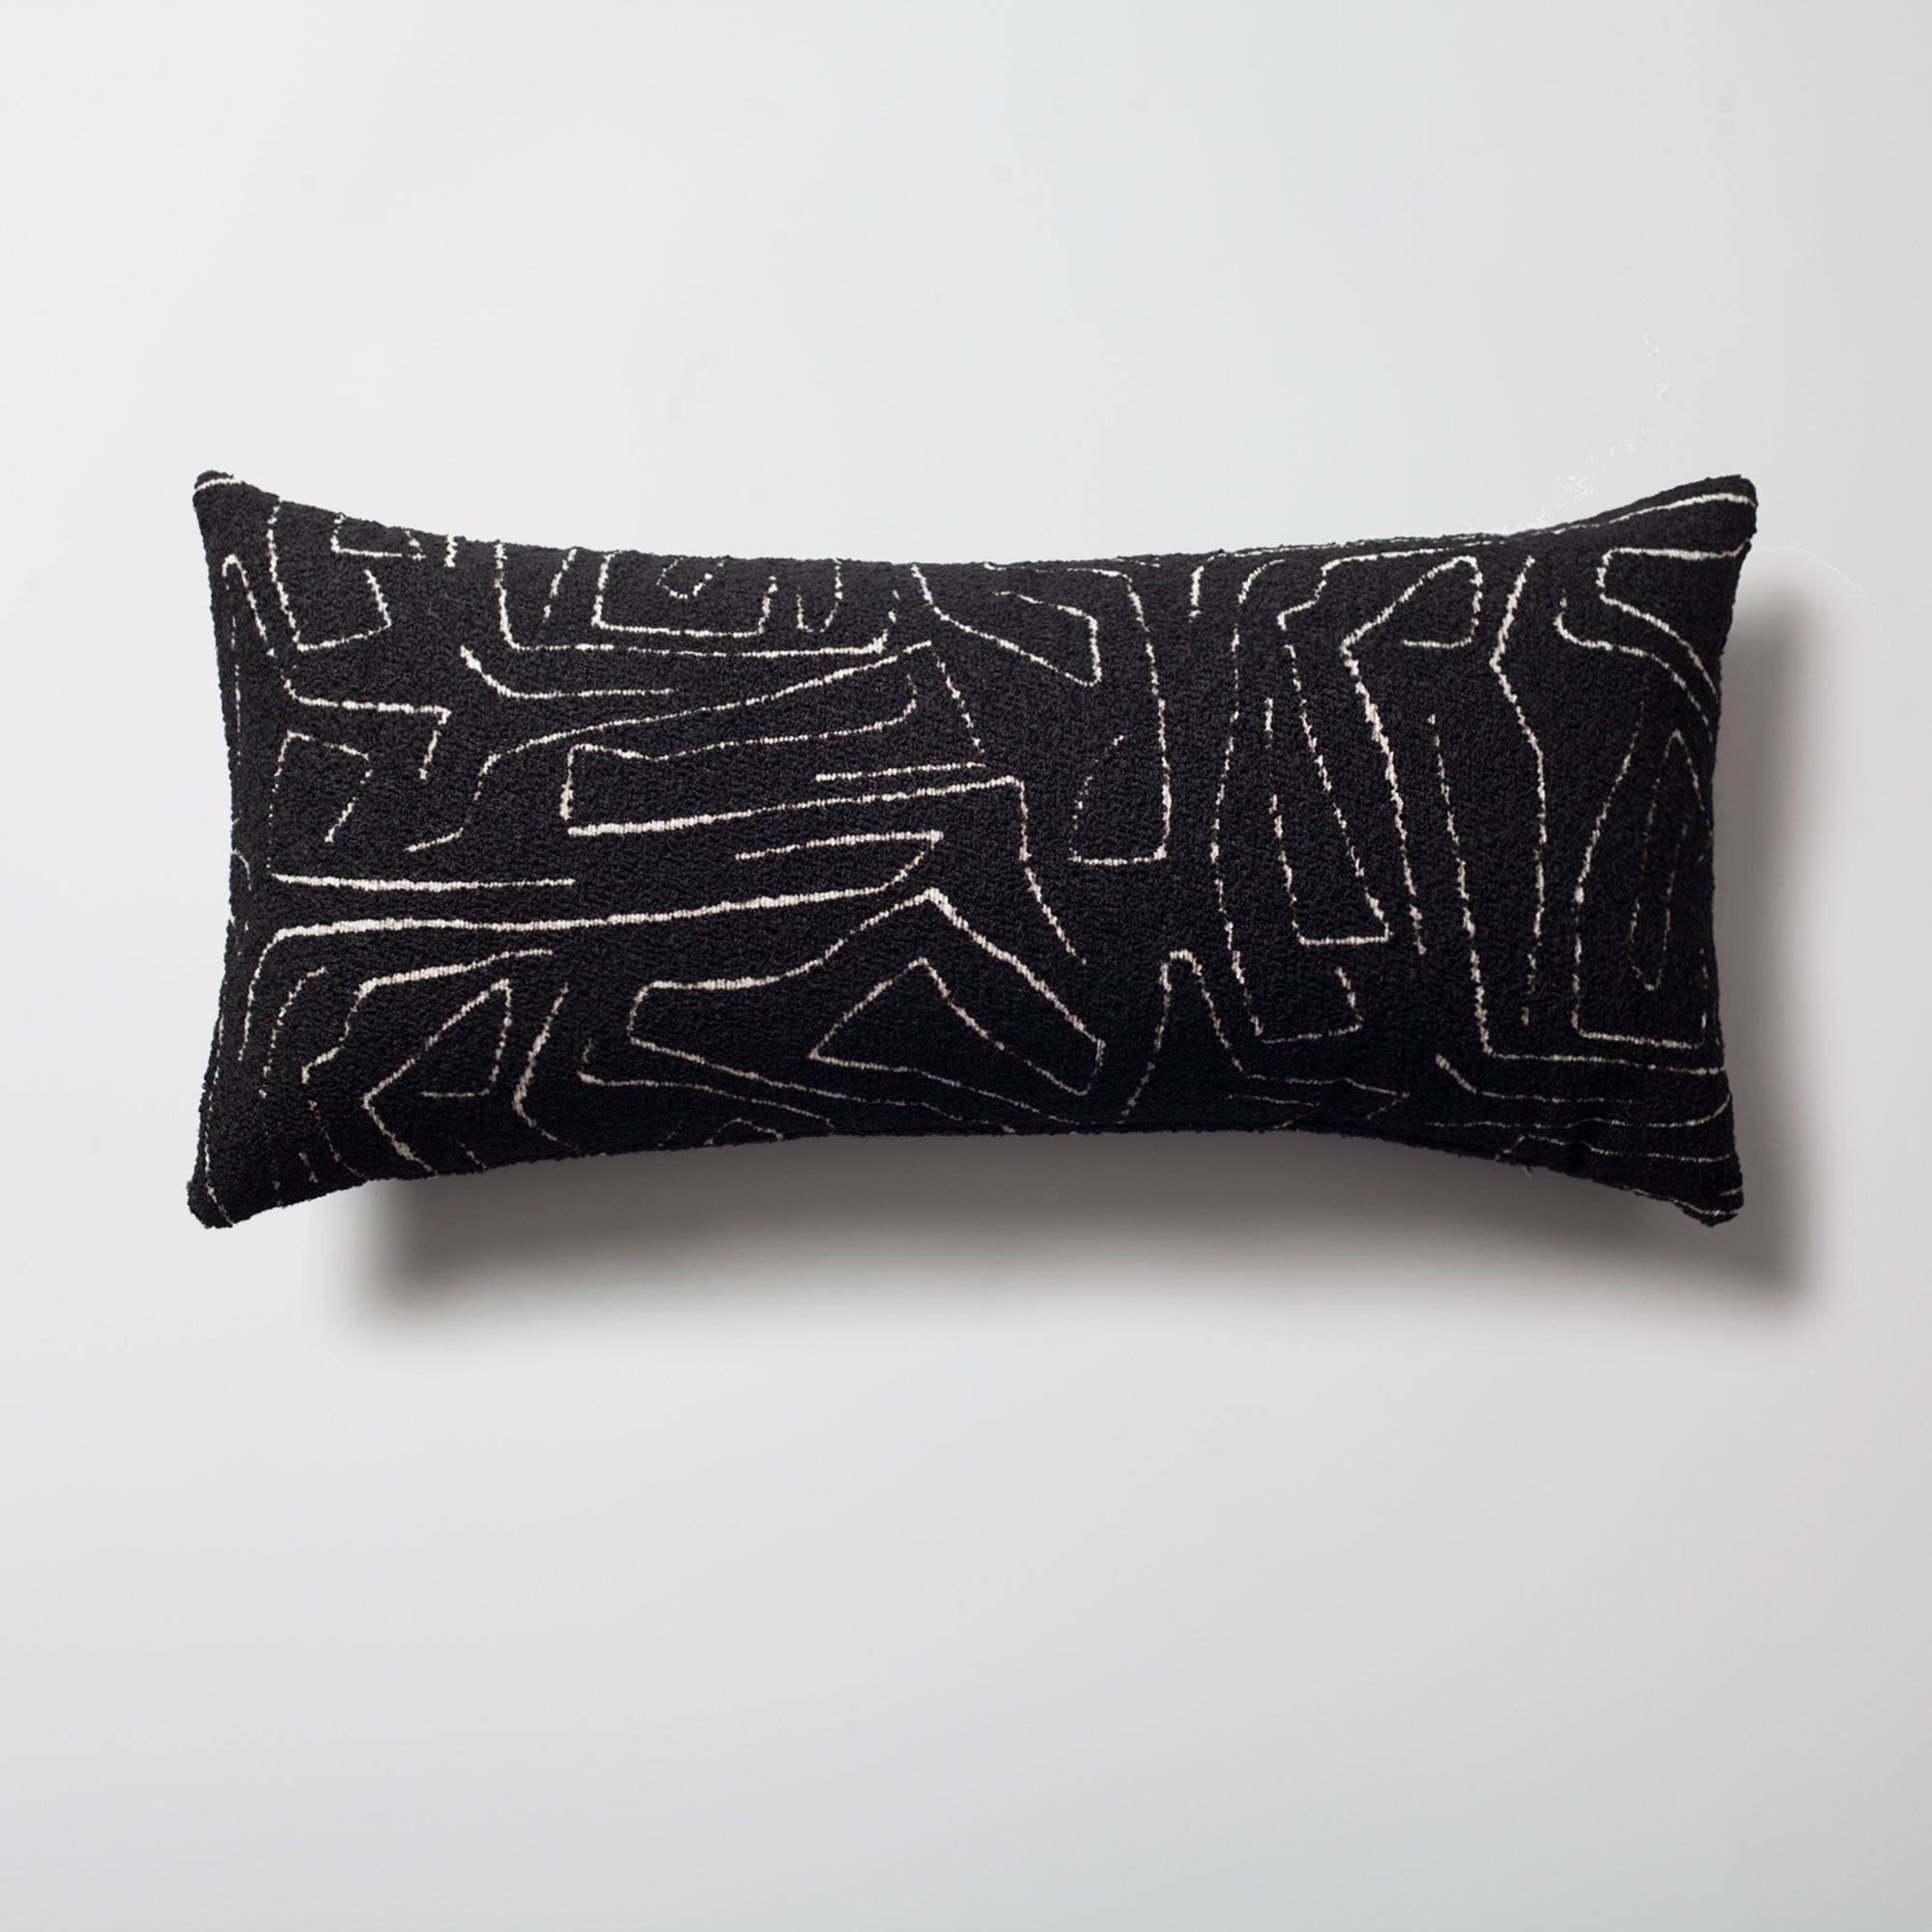 "Amorf" - Abstract Patterned 14x28 Inch Cushion - Black and White(Cover Only)